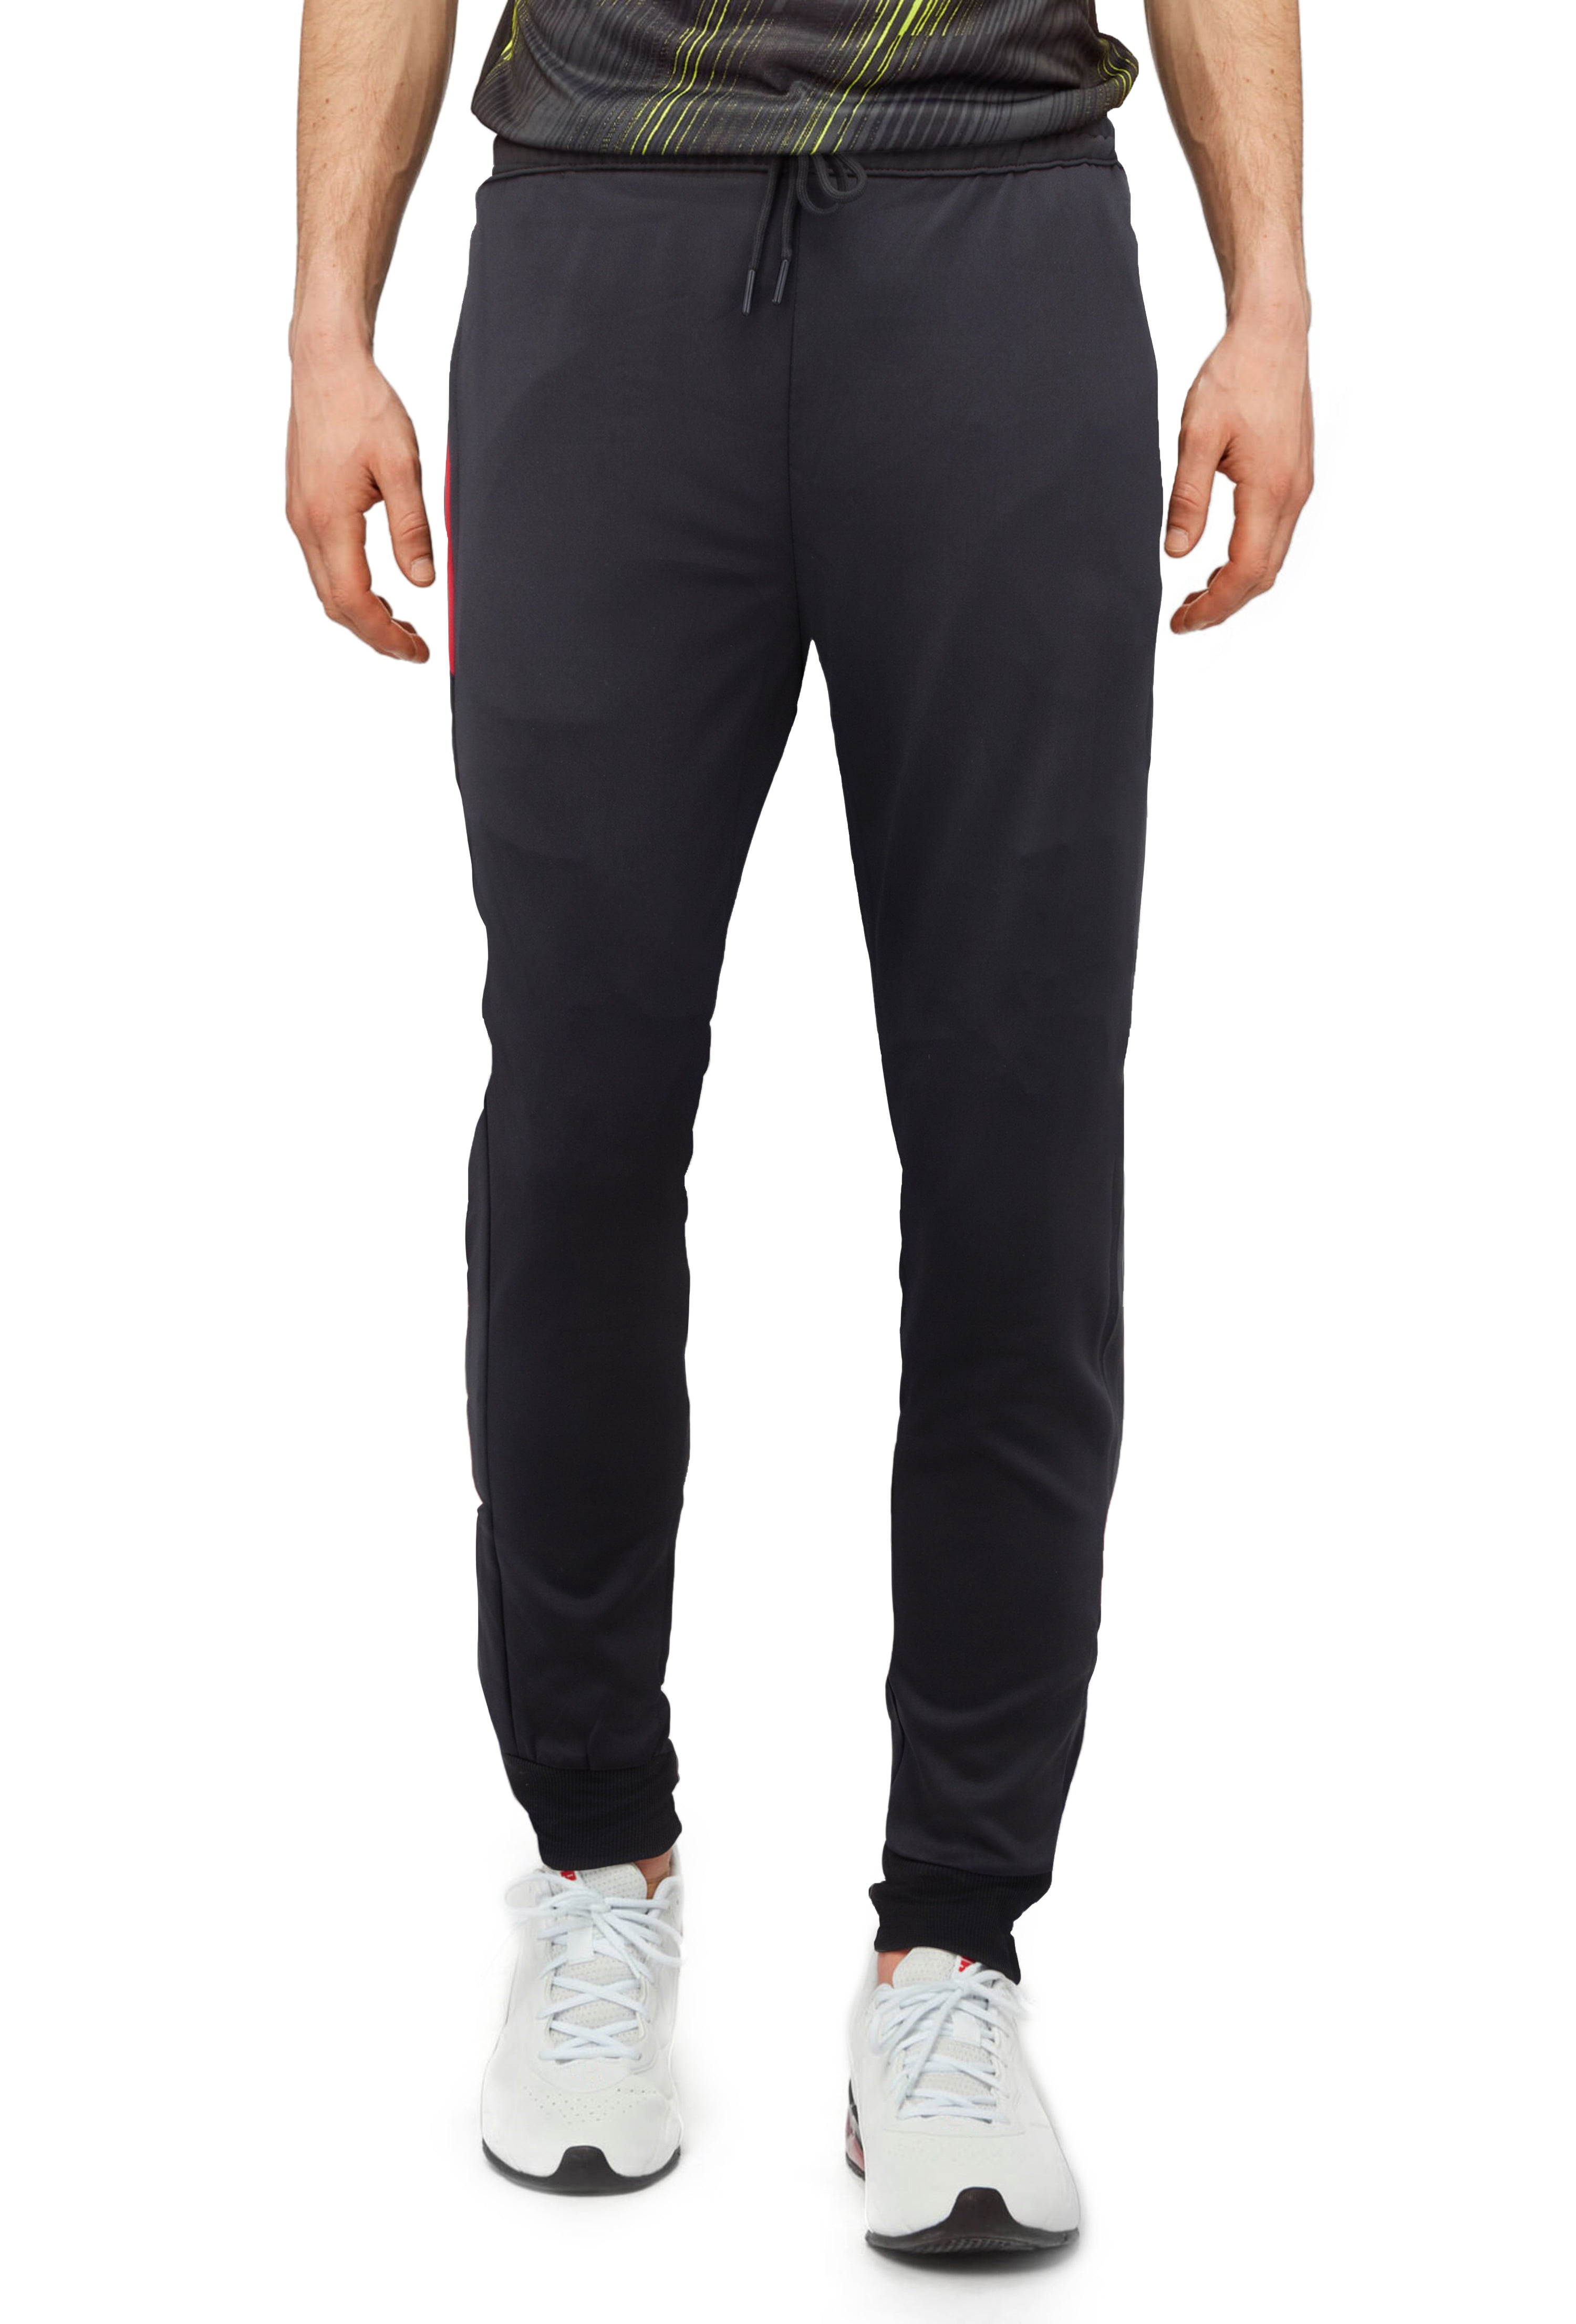 The Gym People Men's Fleece Joggers Pants with Deep Pockets Athletic Loose-fit  Sweatpants for Workout, Running, Training, Fleece Lined Black, Small :  : Fashion